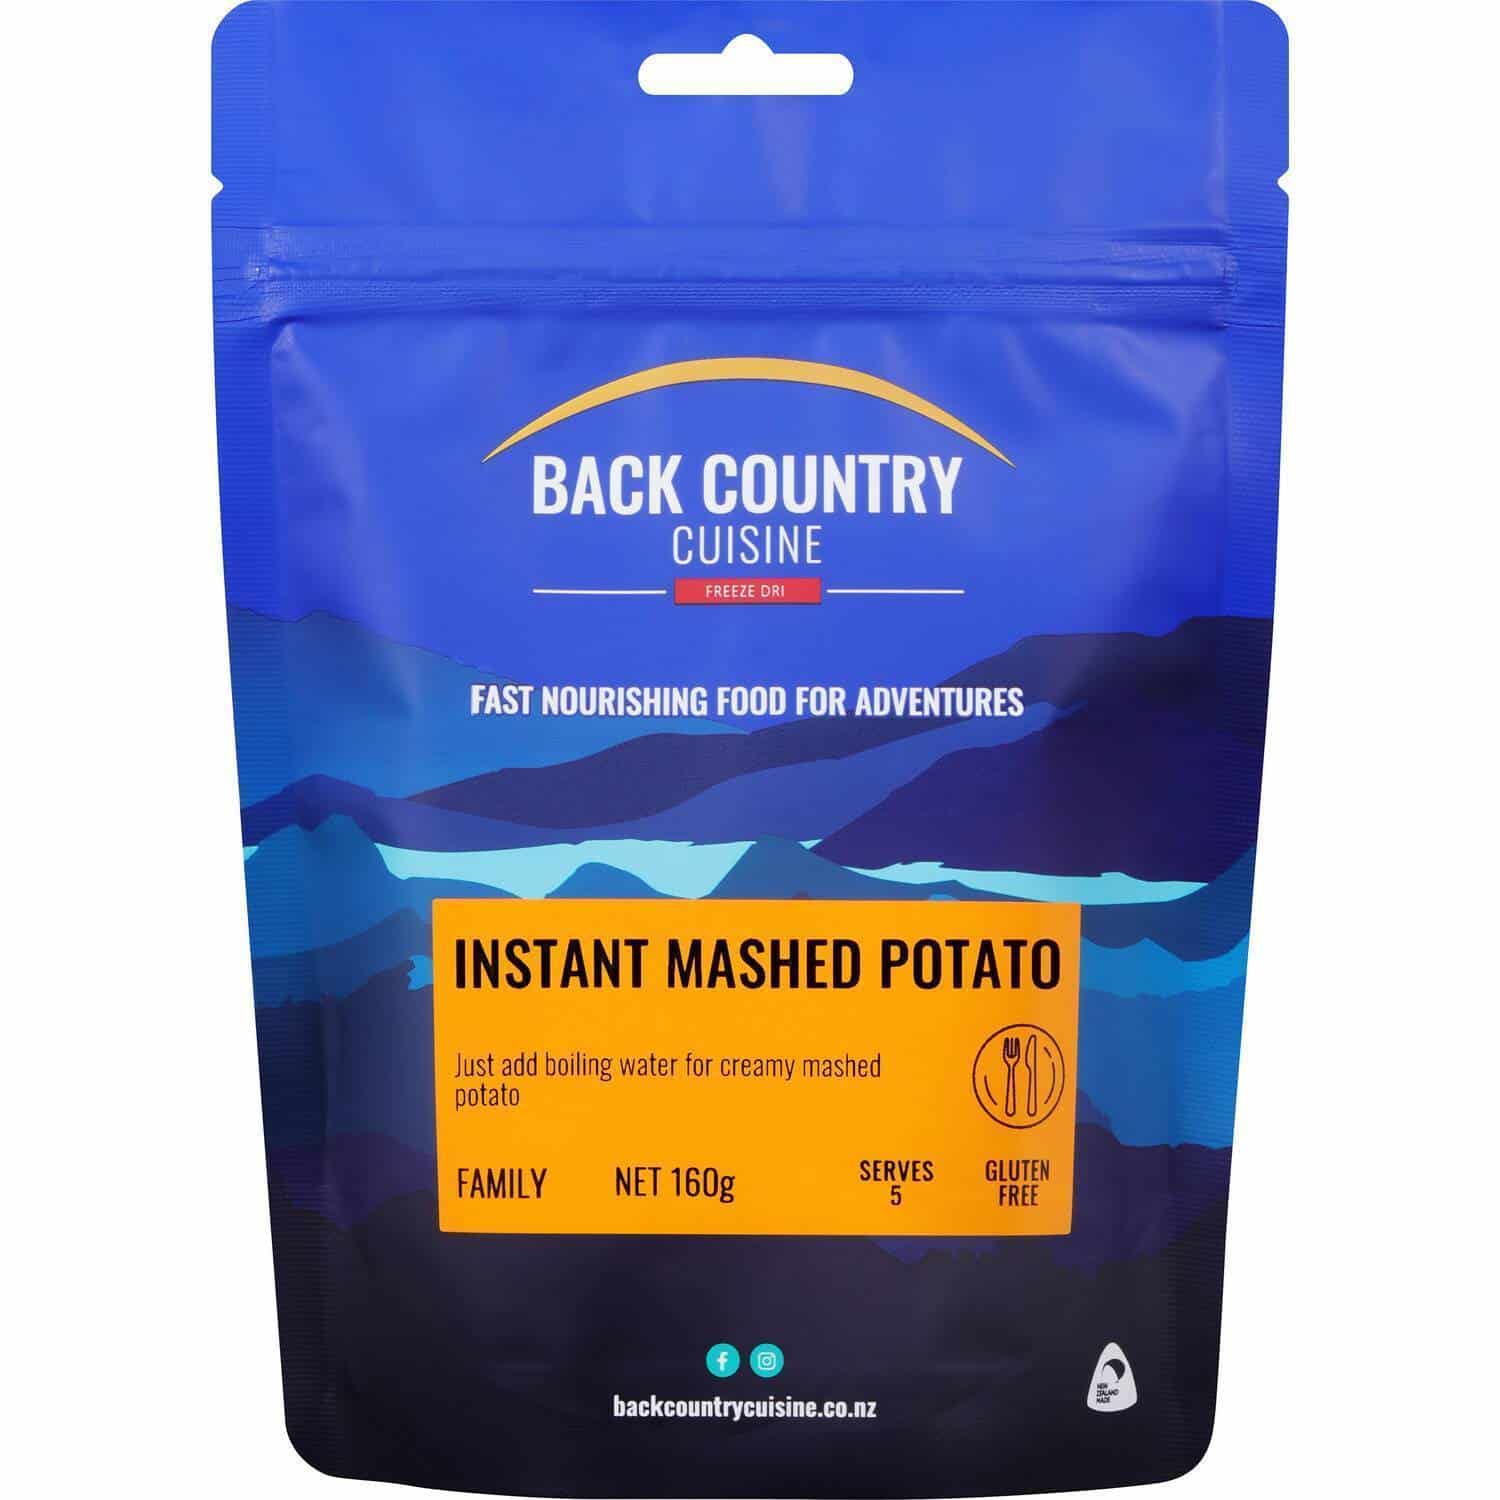 Back Country Cuisine Mashed Potato - Tramping Food and Accessories sold by Venture Outdoors NZ